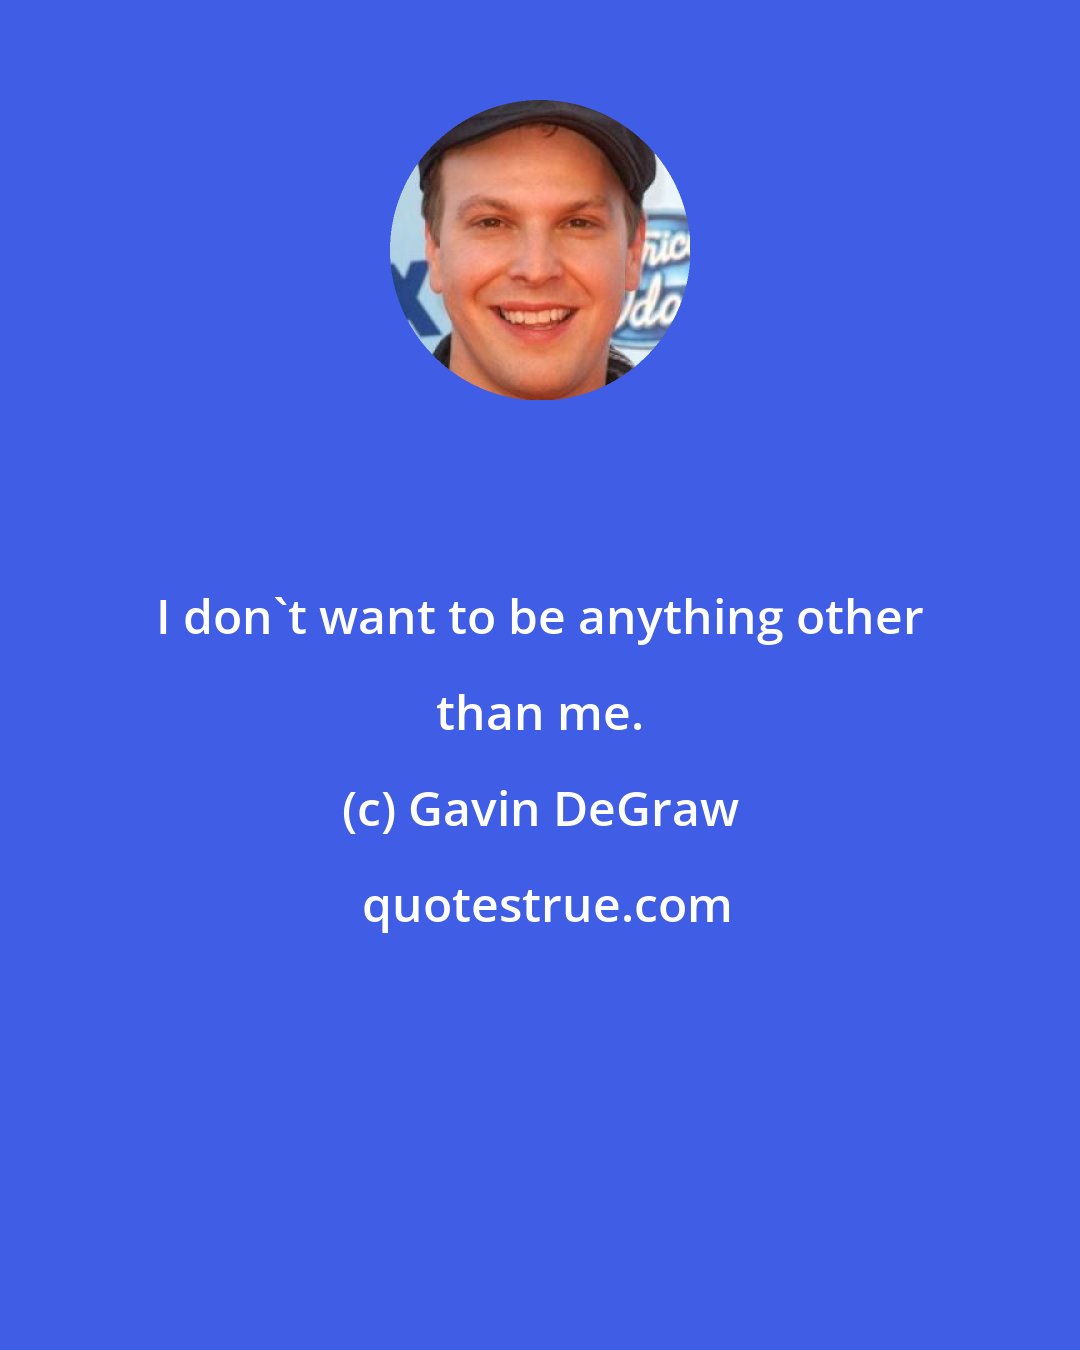 Gavin DeGraw: I don't want to be anything other than me.